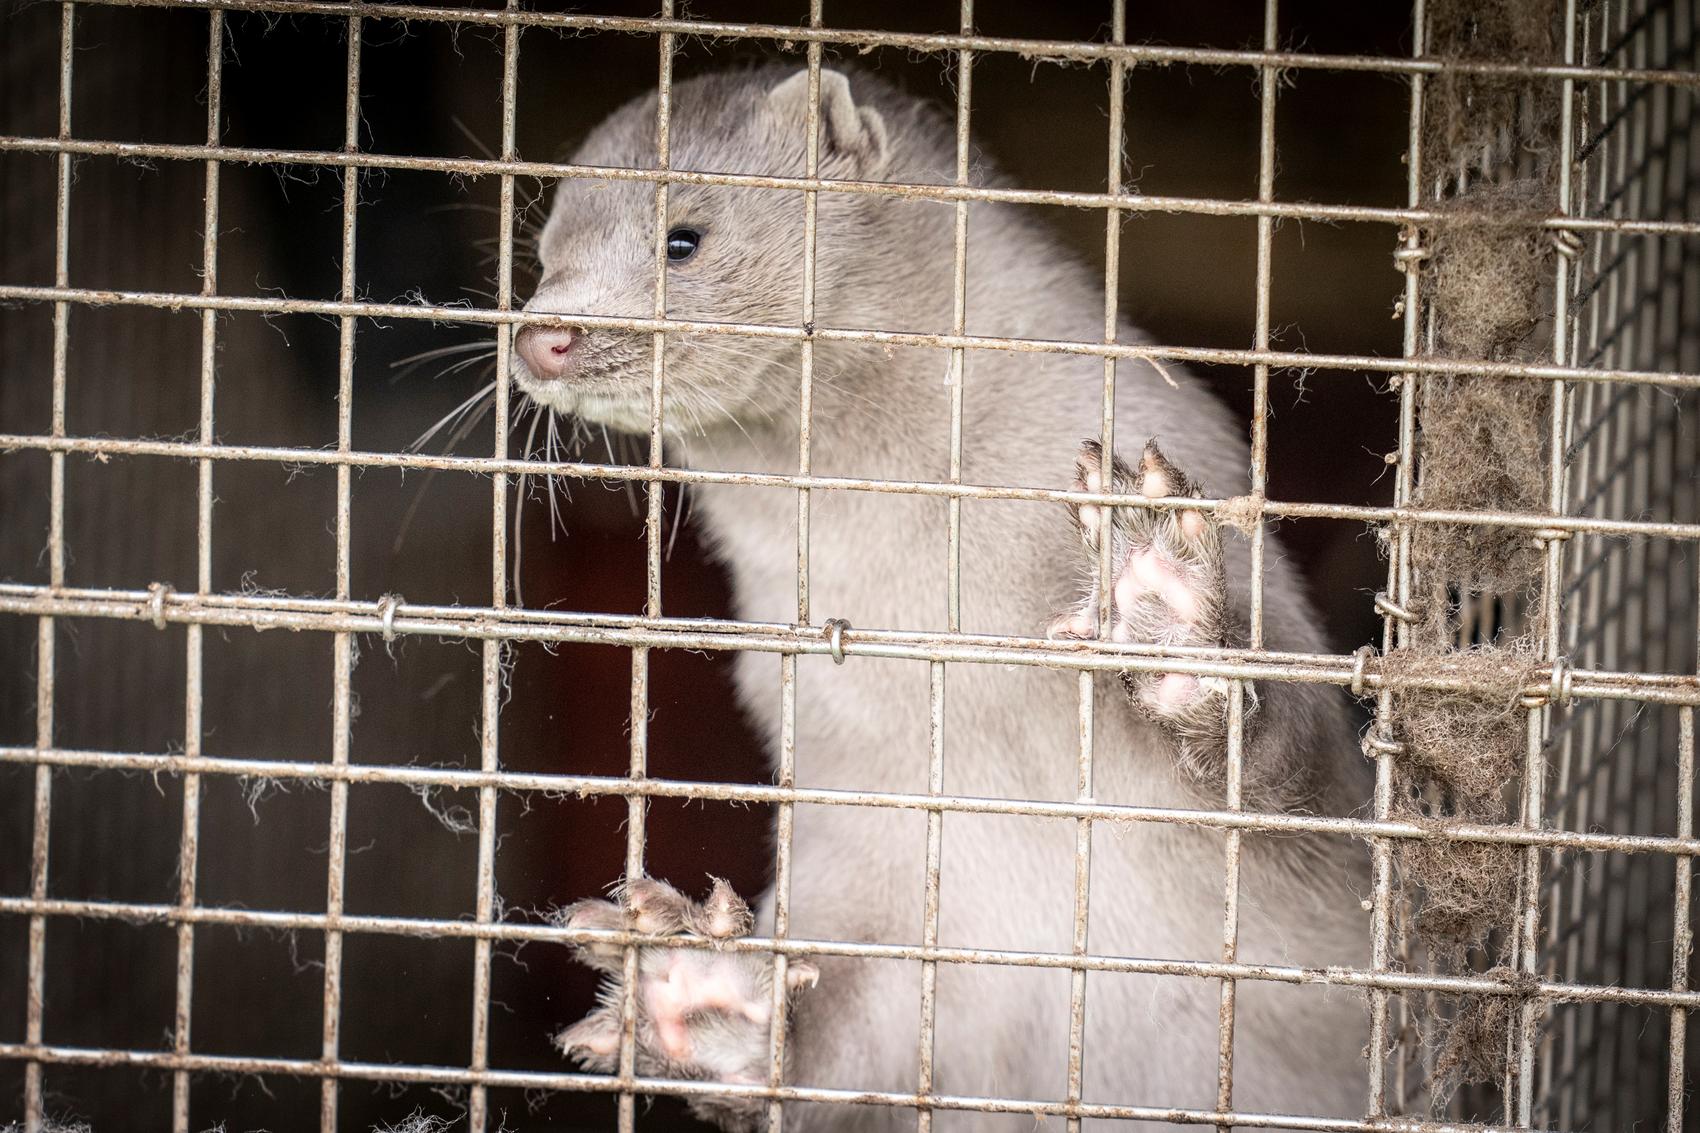 Denmark plans to cull its mink population after coronavirus mutation spreads to humans